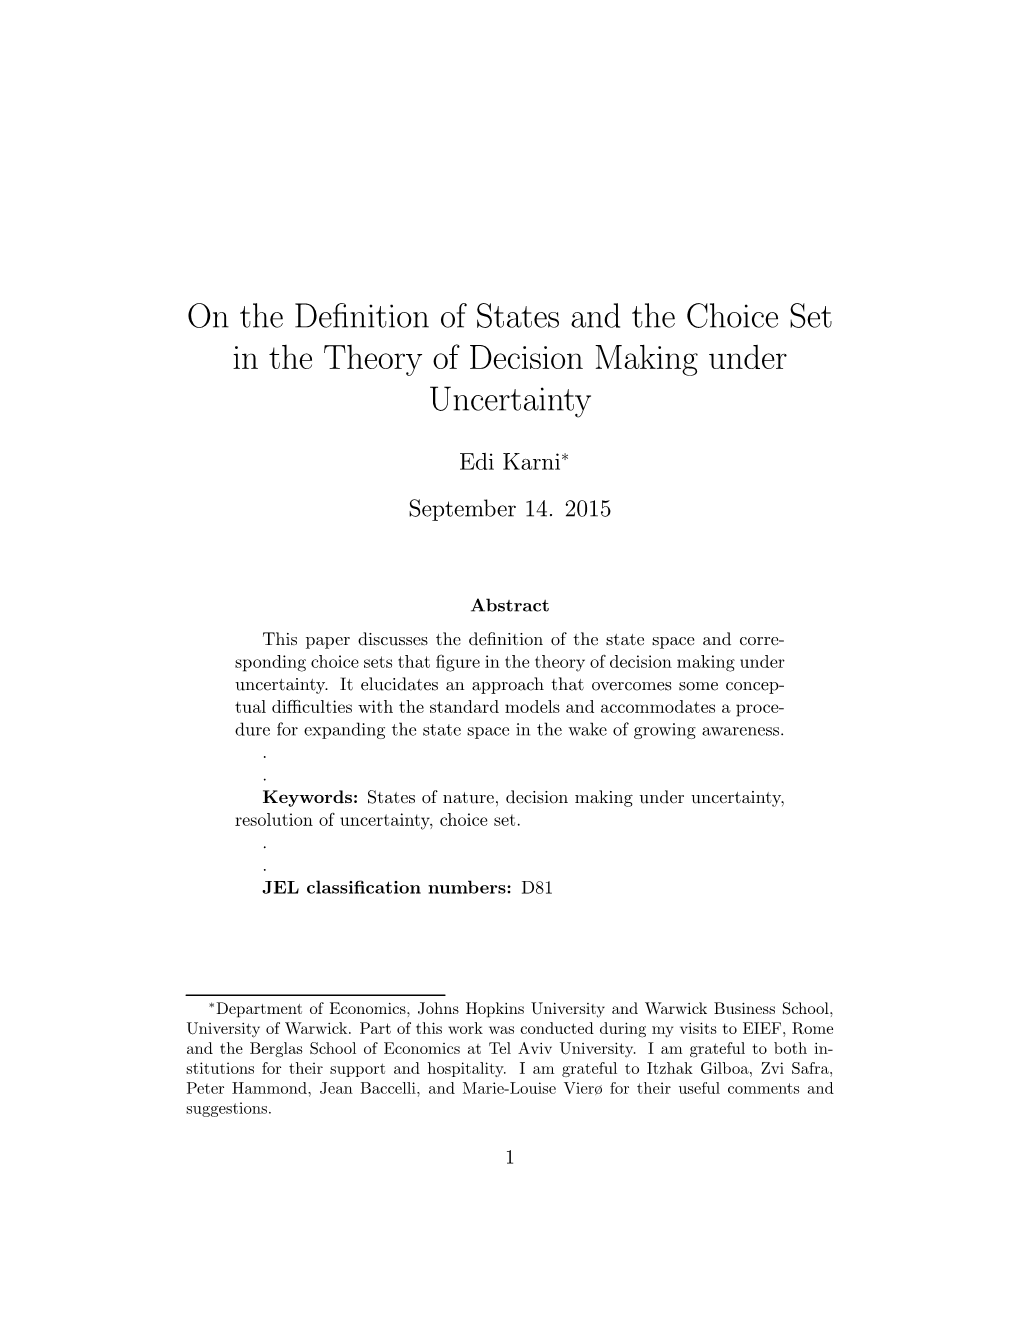 On the Definition of States and the Choice Set in the Theory Of